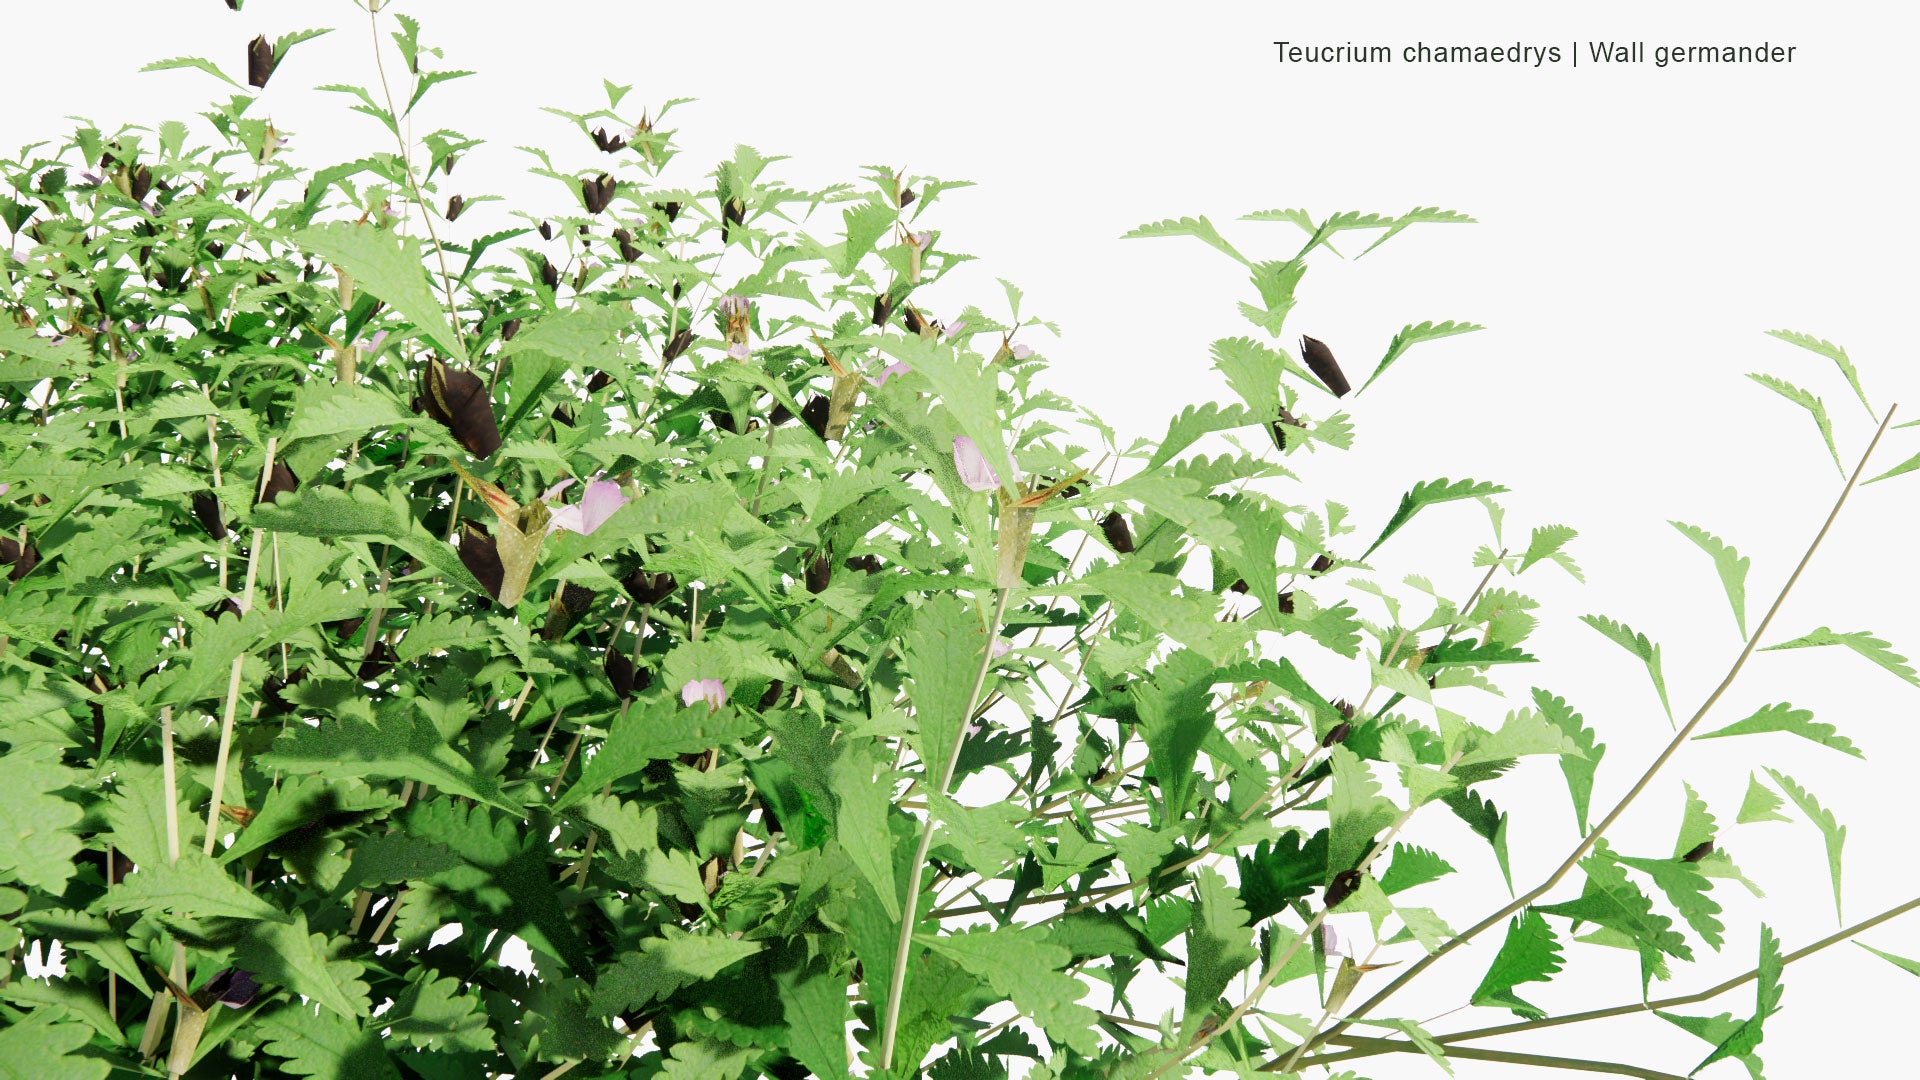 Low Poly Teucrium Chamaedrys - Wall Germander (3D Model)